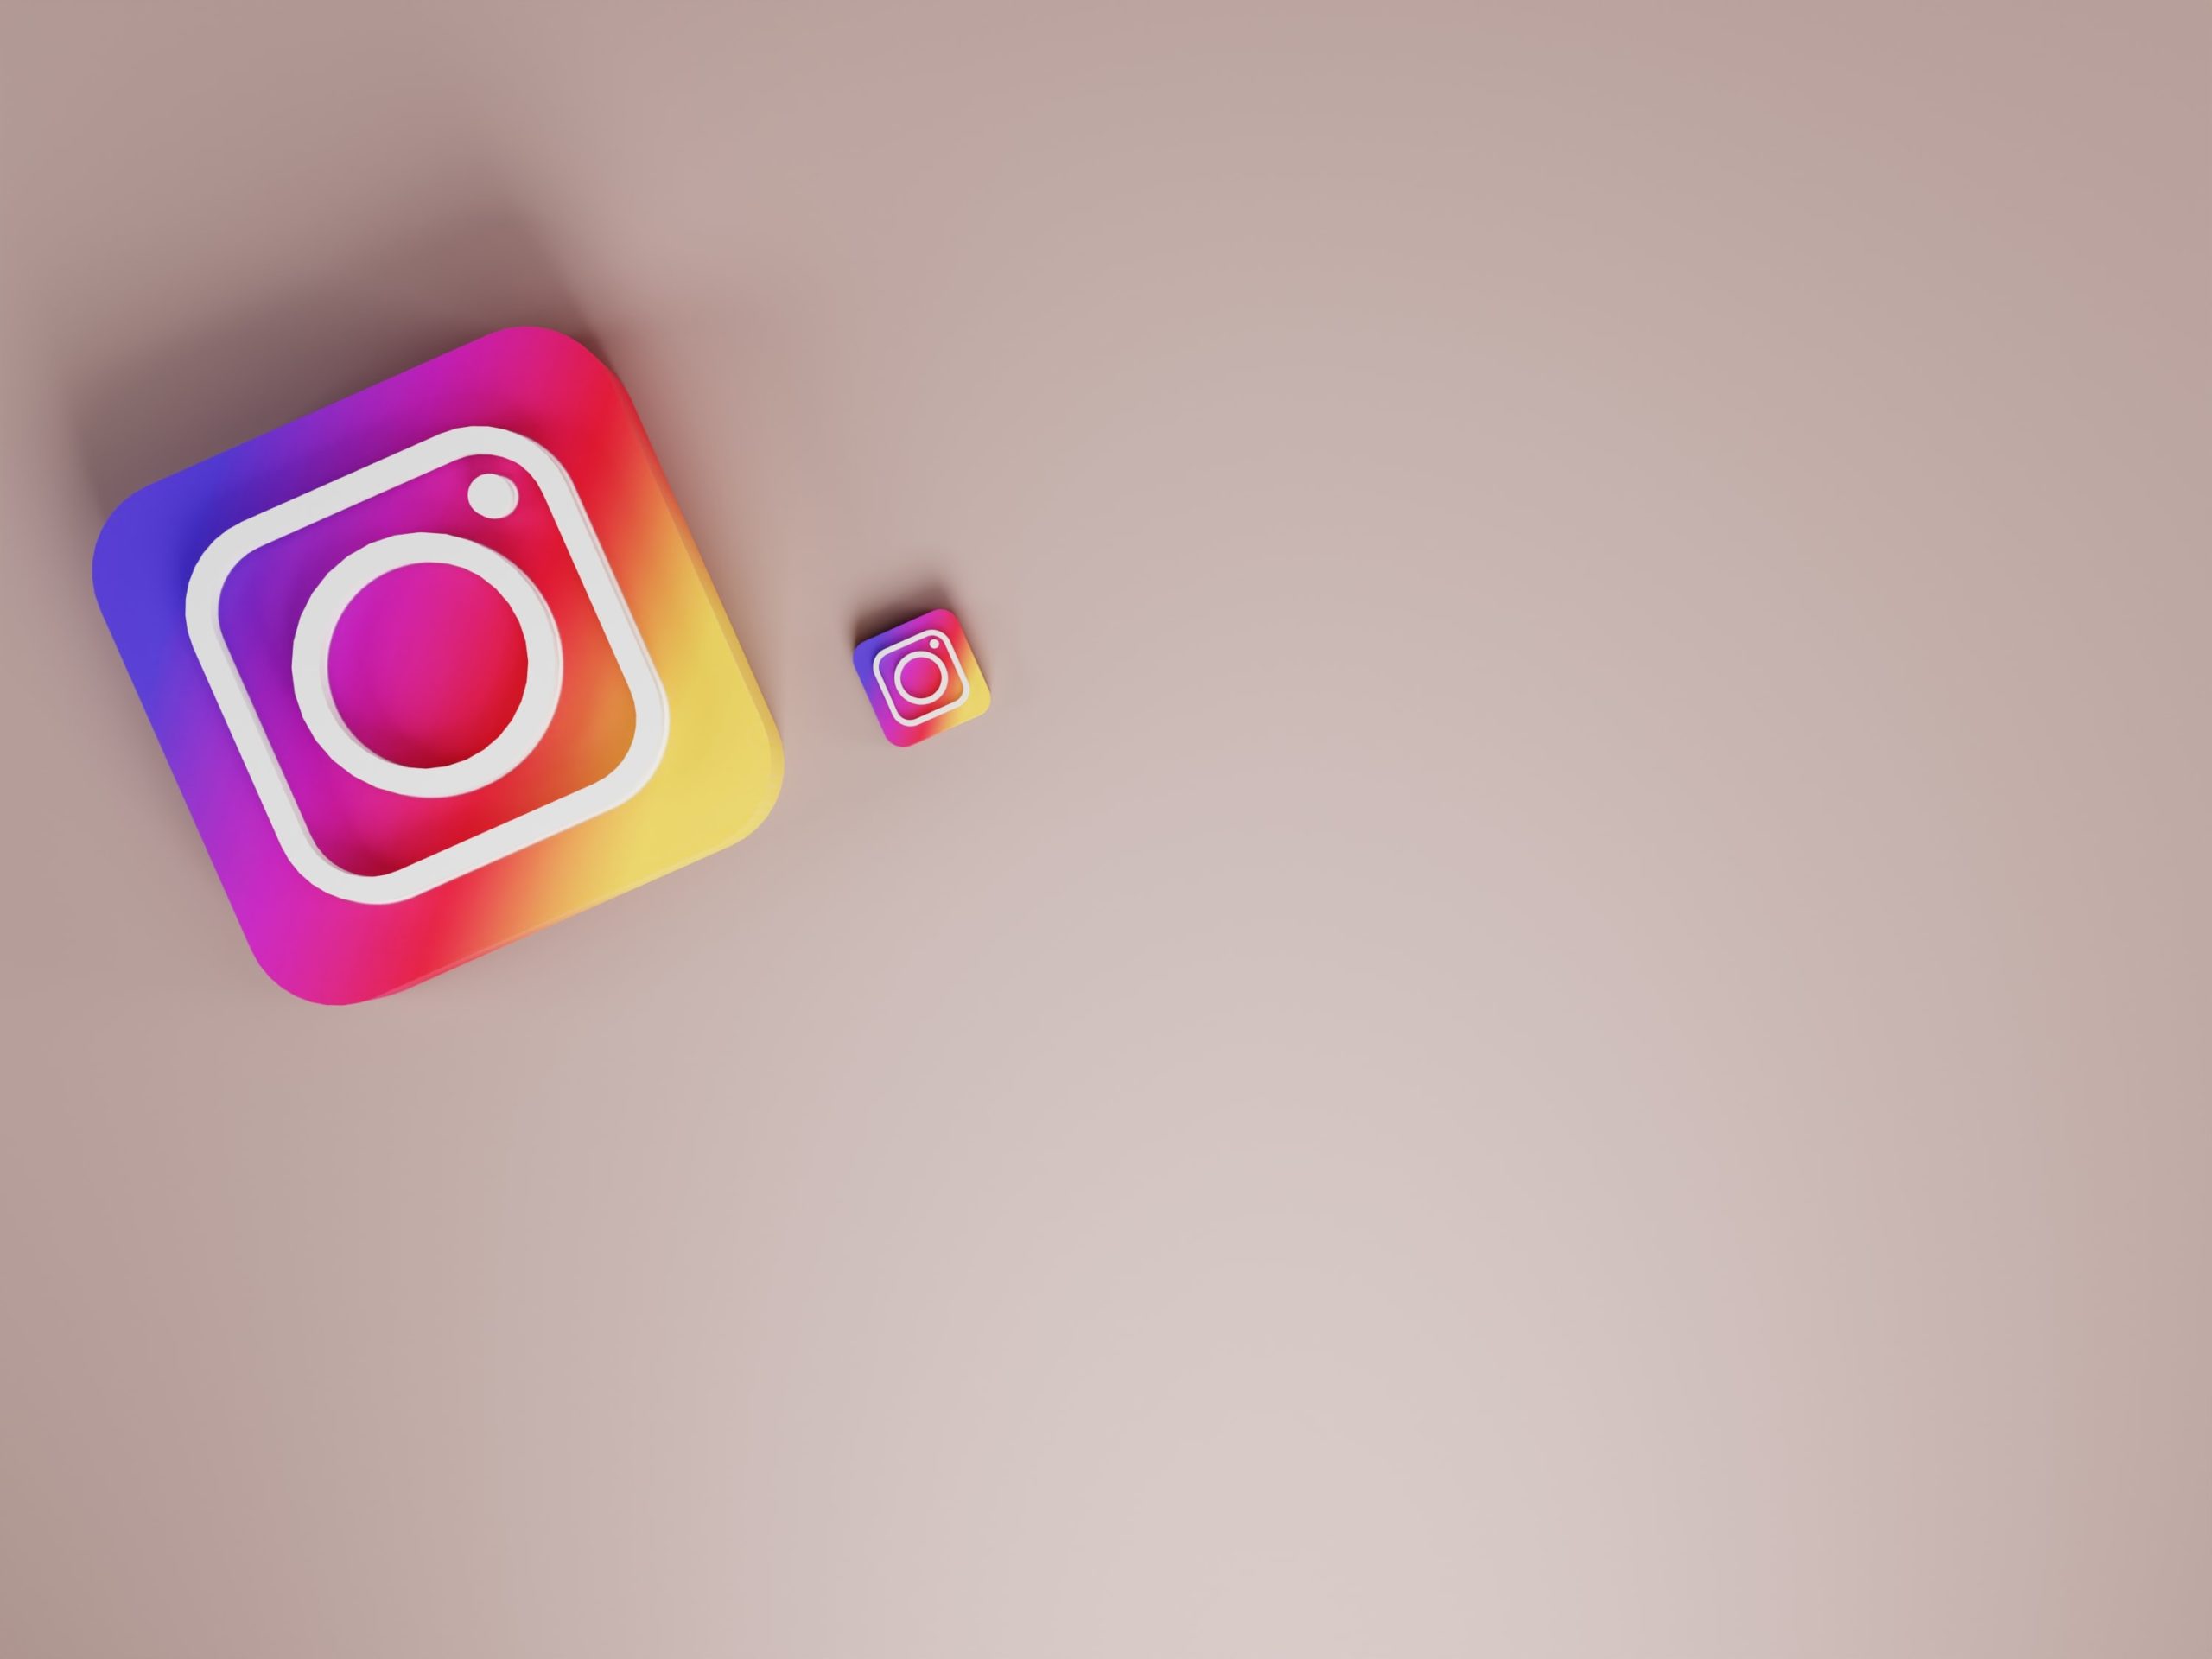 How to Become an Instagram Influencer